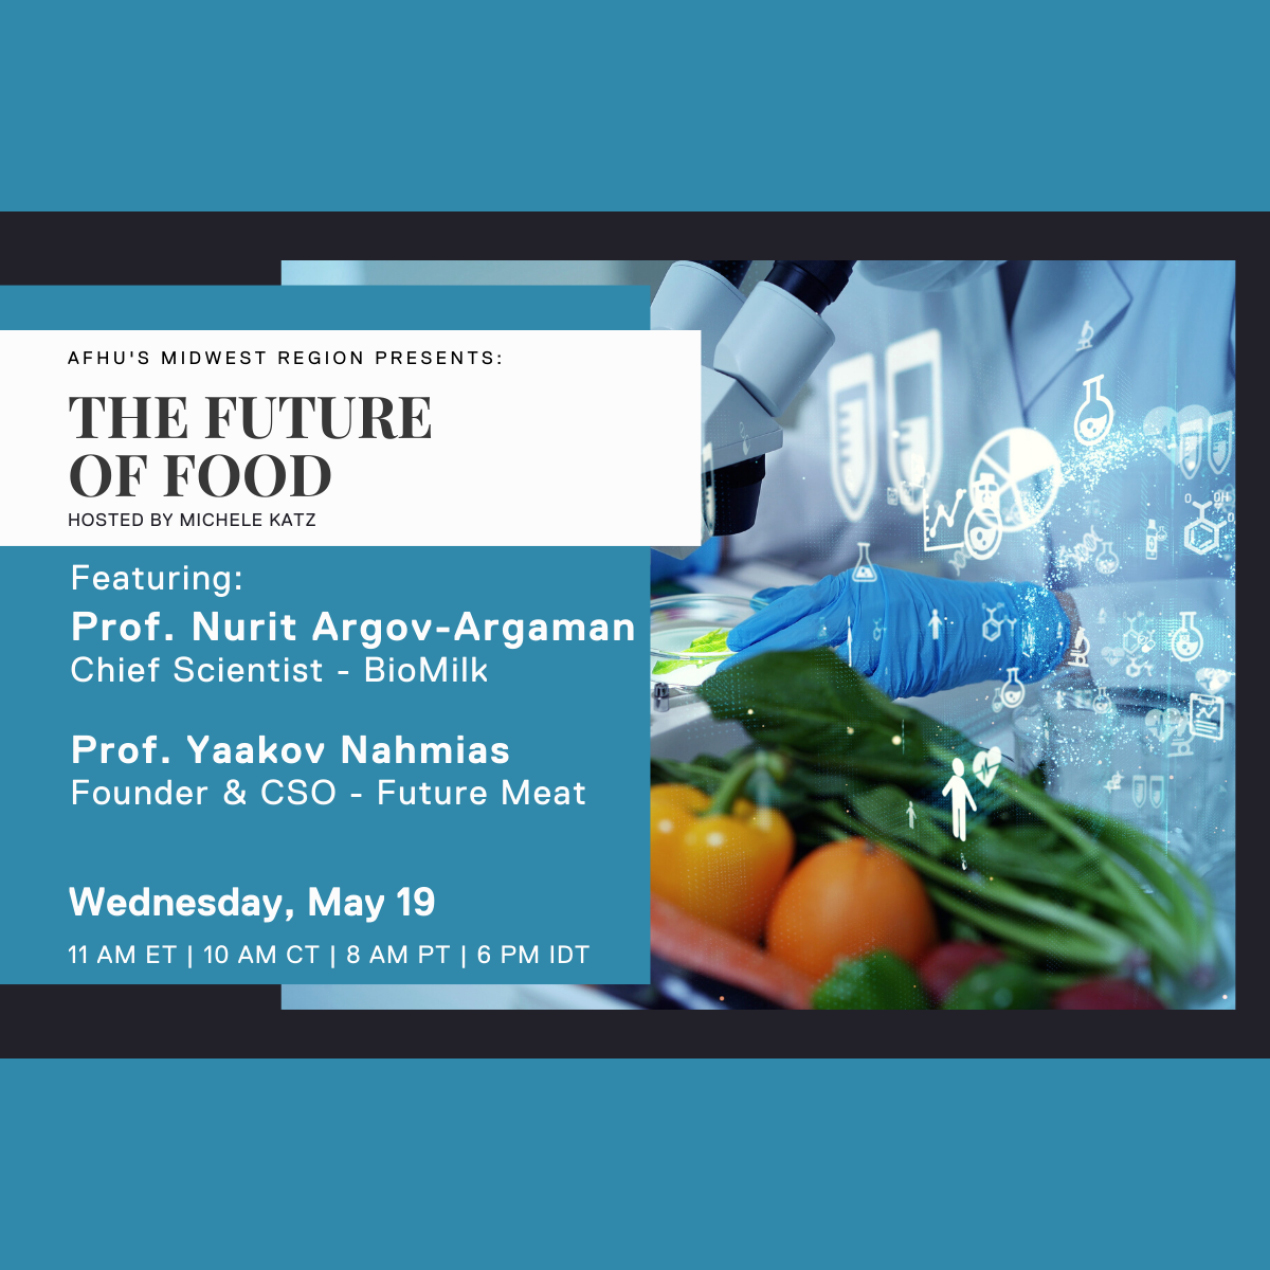 AFHU’s Midwest Region Presents: “The Future of Food” hosted by Michele Katz